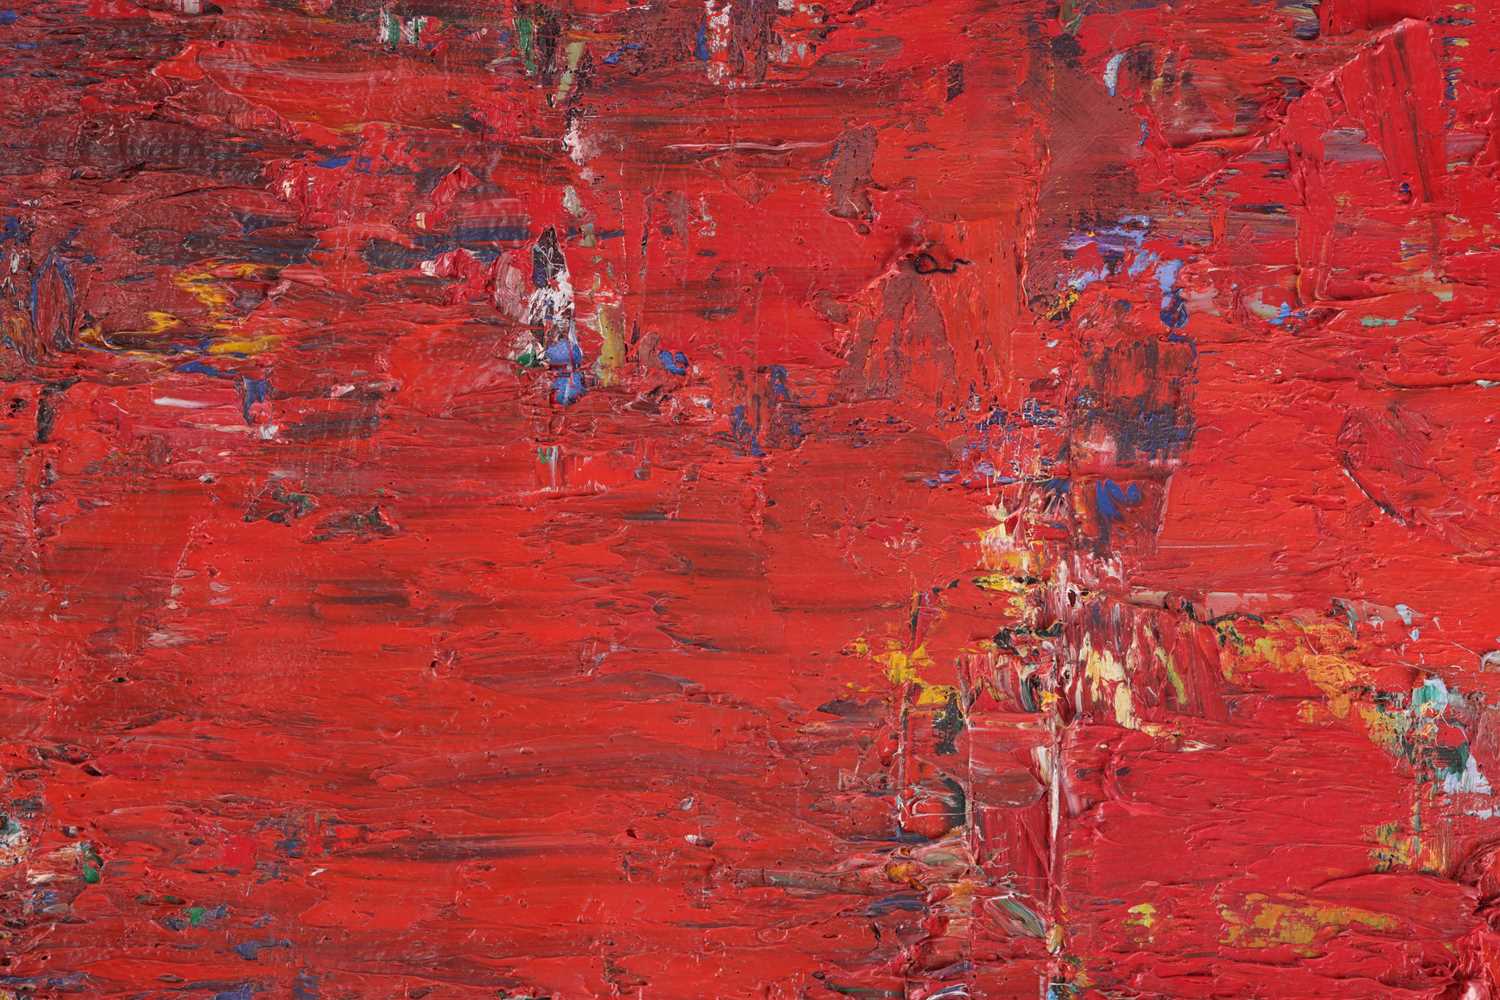 Martyn Brewster (b. 1952), 'Red Painting' (1988), signed 'Martin Brewster' and titled on the reverse - Image 3 of 7